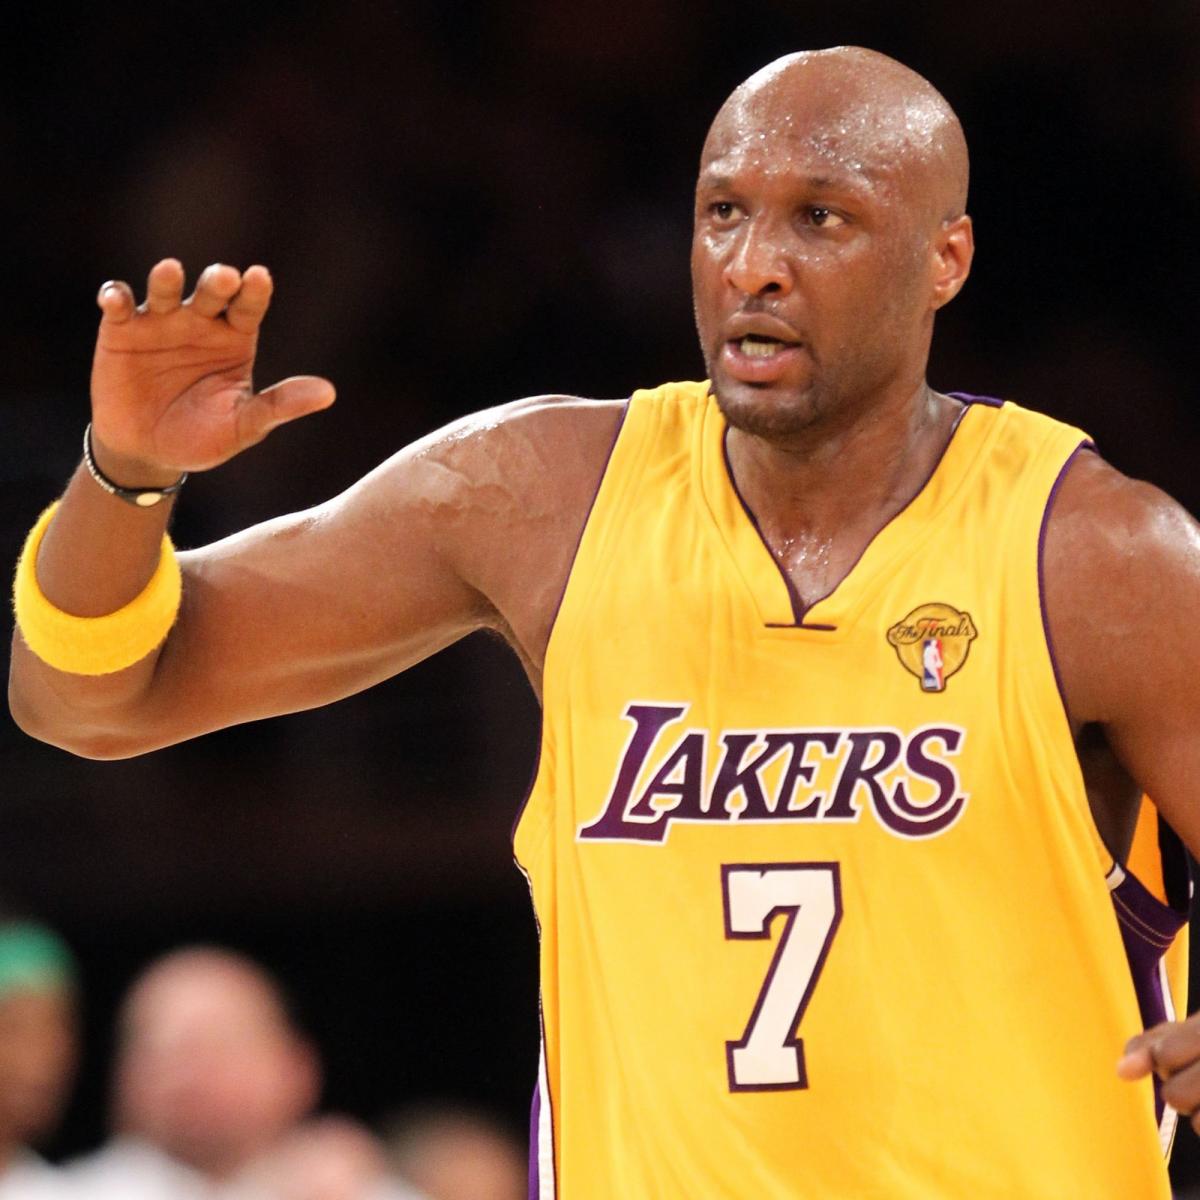 Lamar Odom pawned his championship rings. Now they're on auction